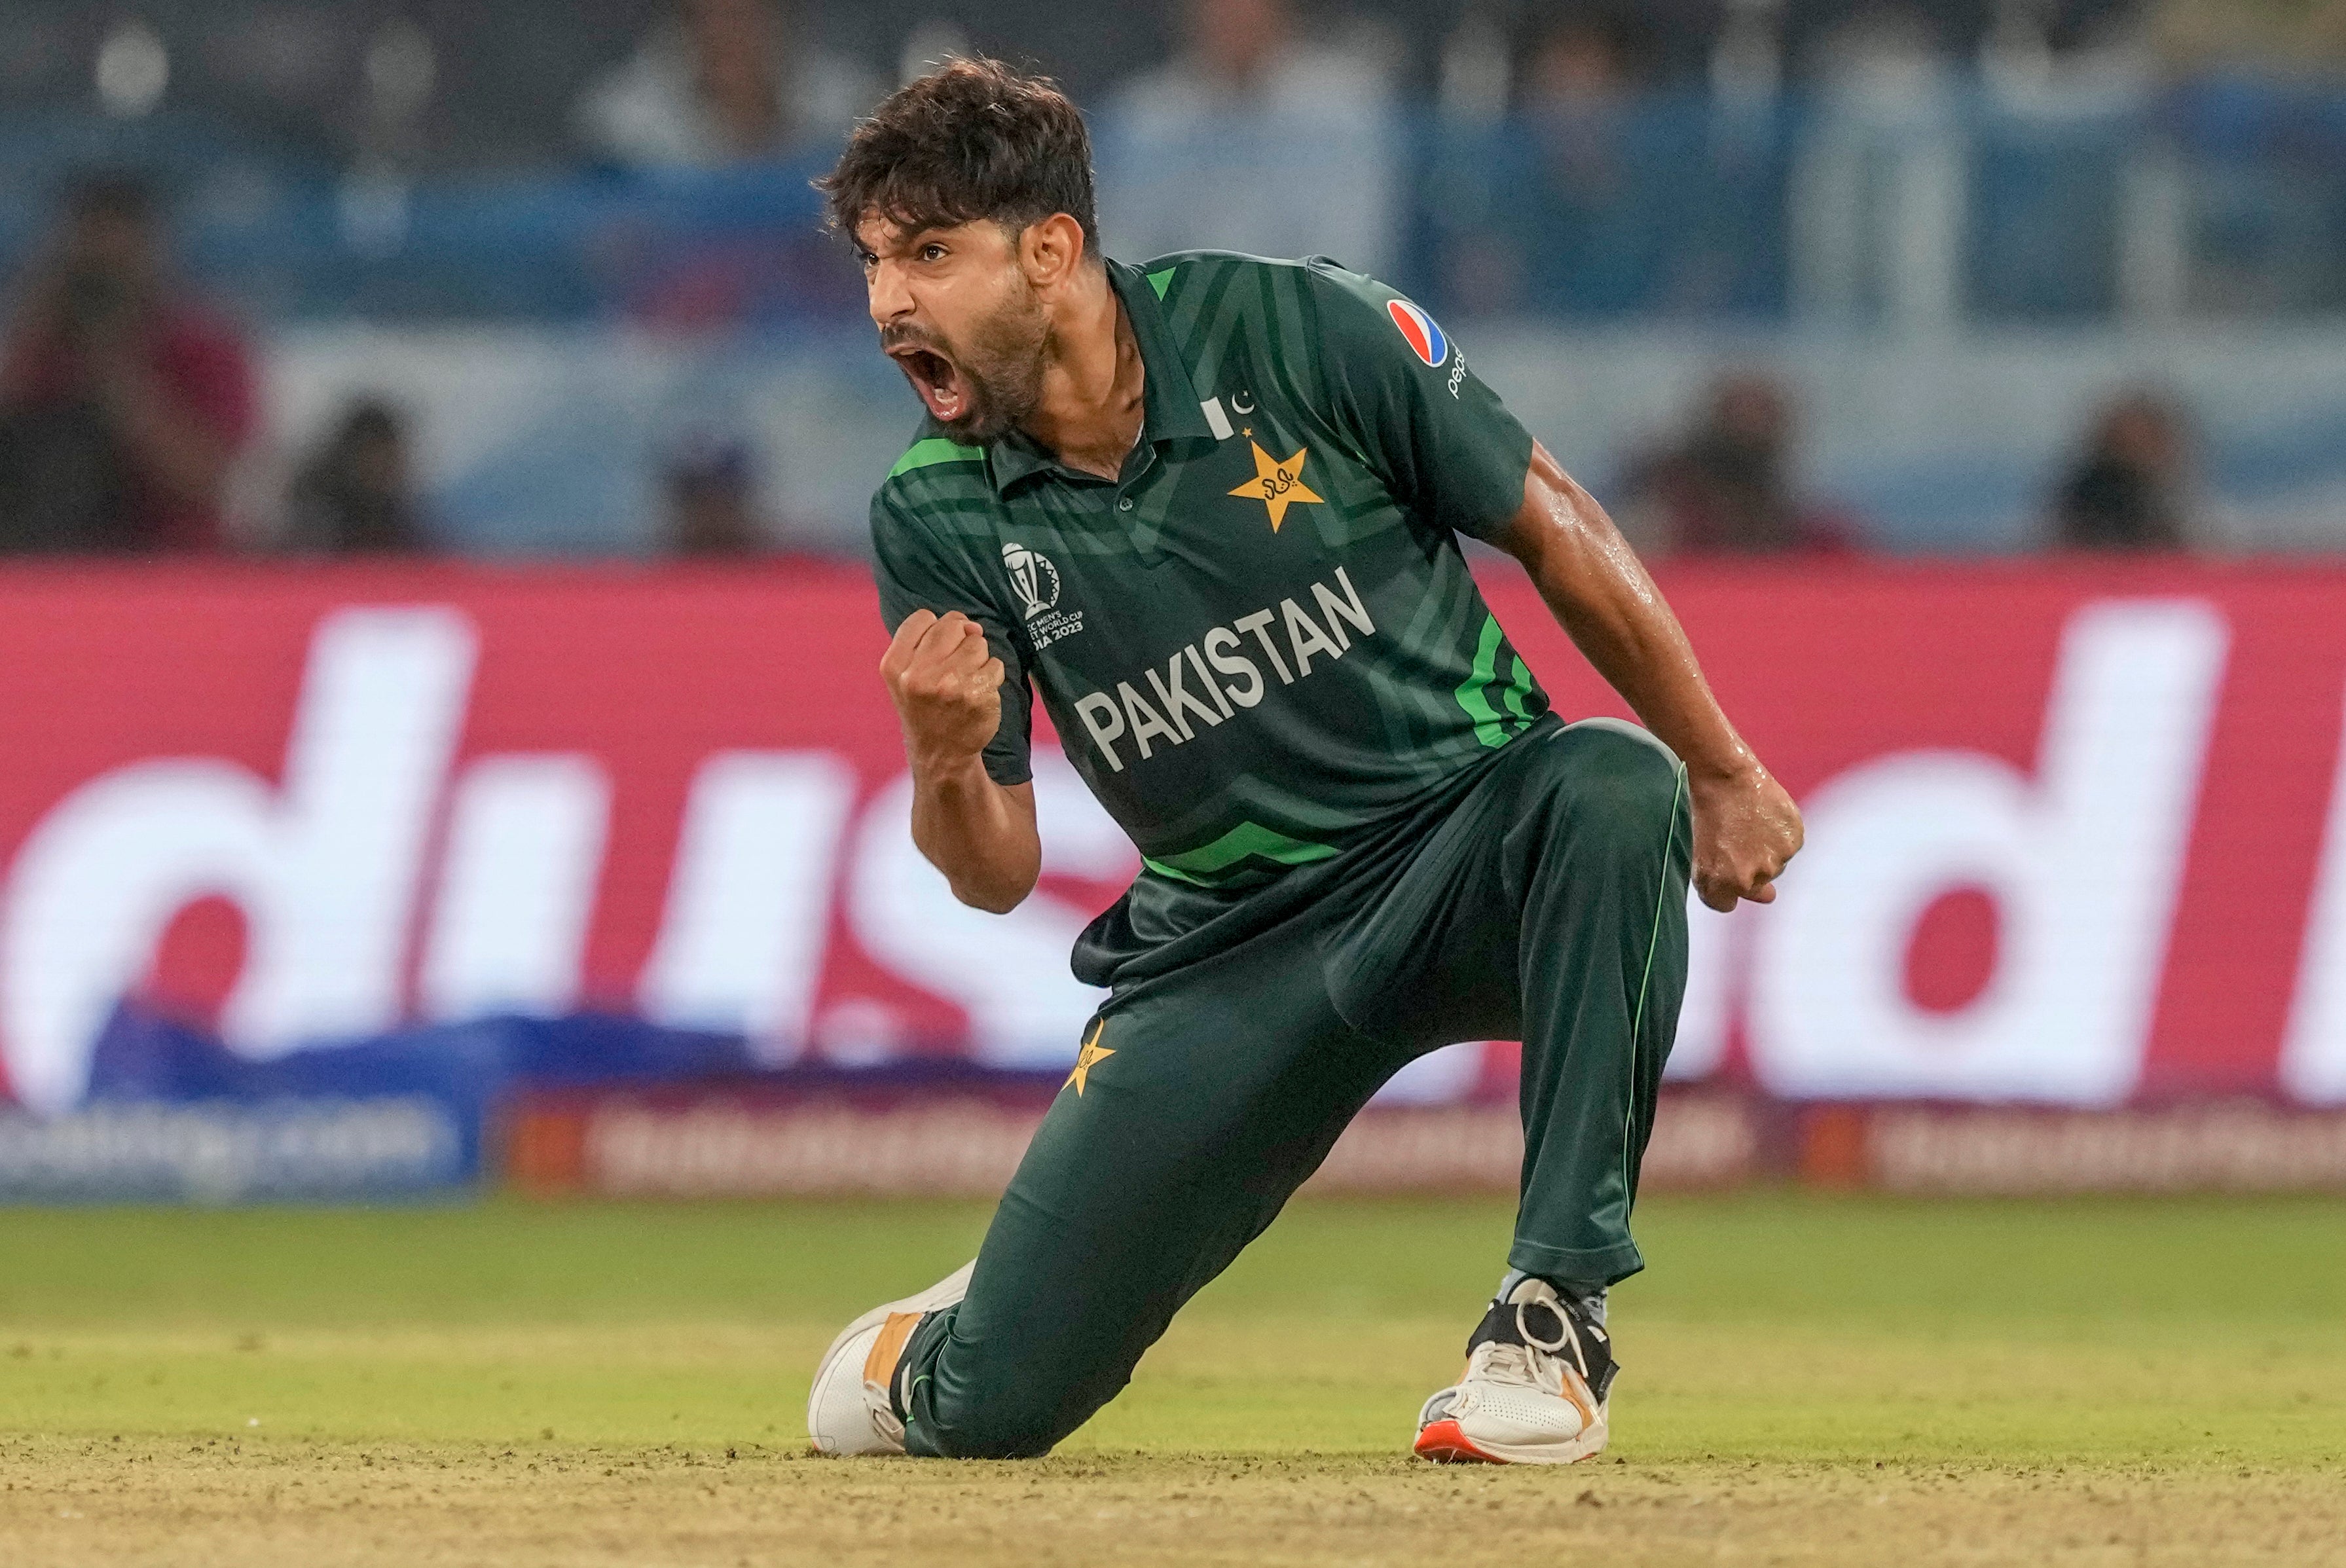 Haris Rauf starred with the ball as Pakistan defeated the Netherlands